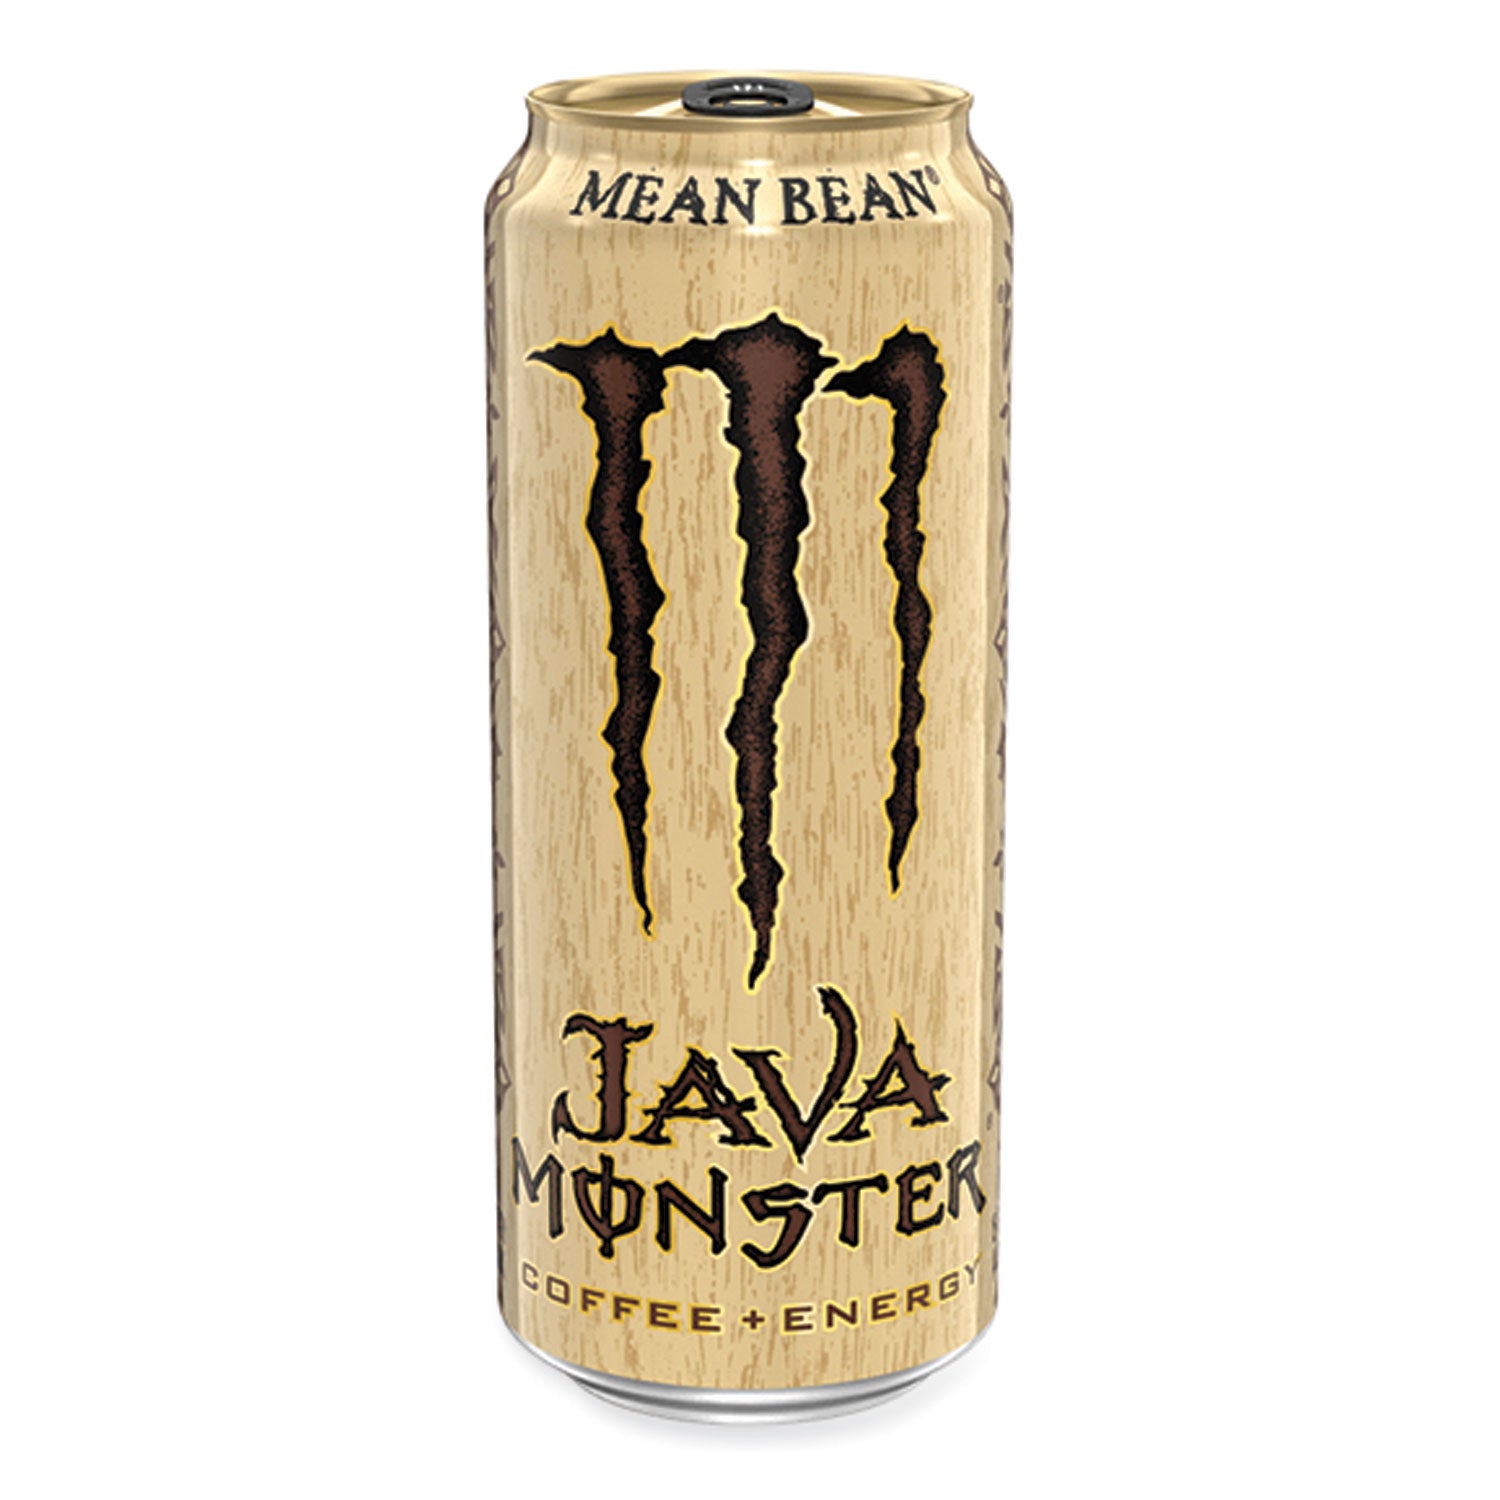 java-monster-cold-brew-coffee-mean-bean-15-oz-can-12-pack_ccr070847812609 - 1